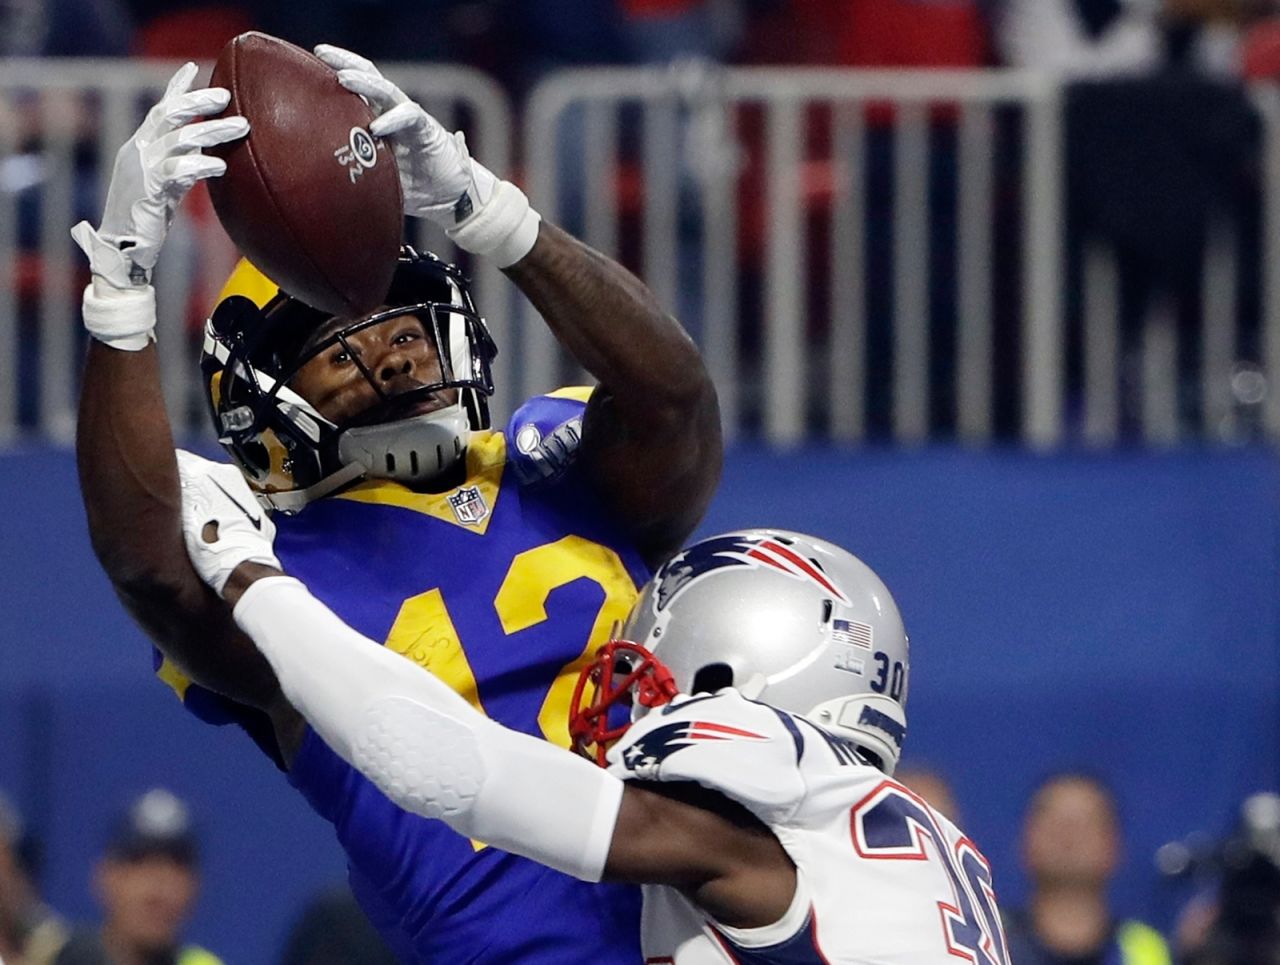 Patriots defensive back Jason McCourty breaks up a pass in the end zone that was intended for Rams wide receiver Brandin Cooks in the third quarter.